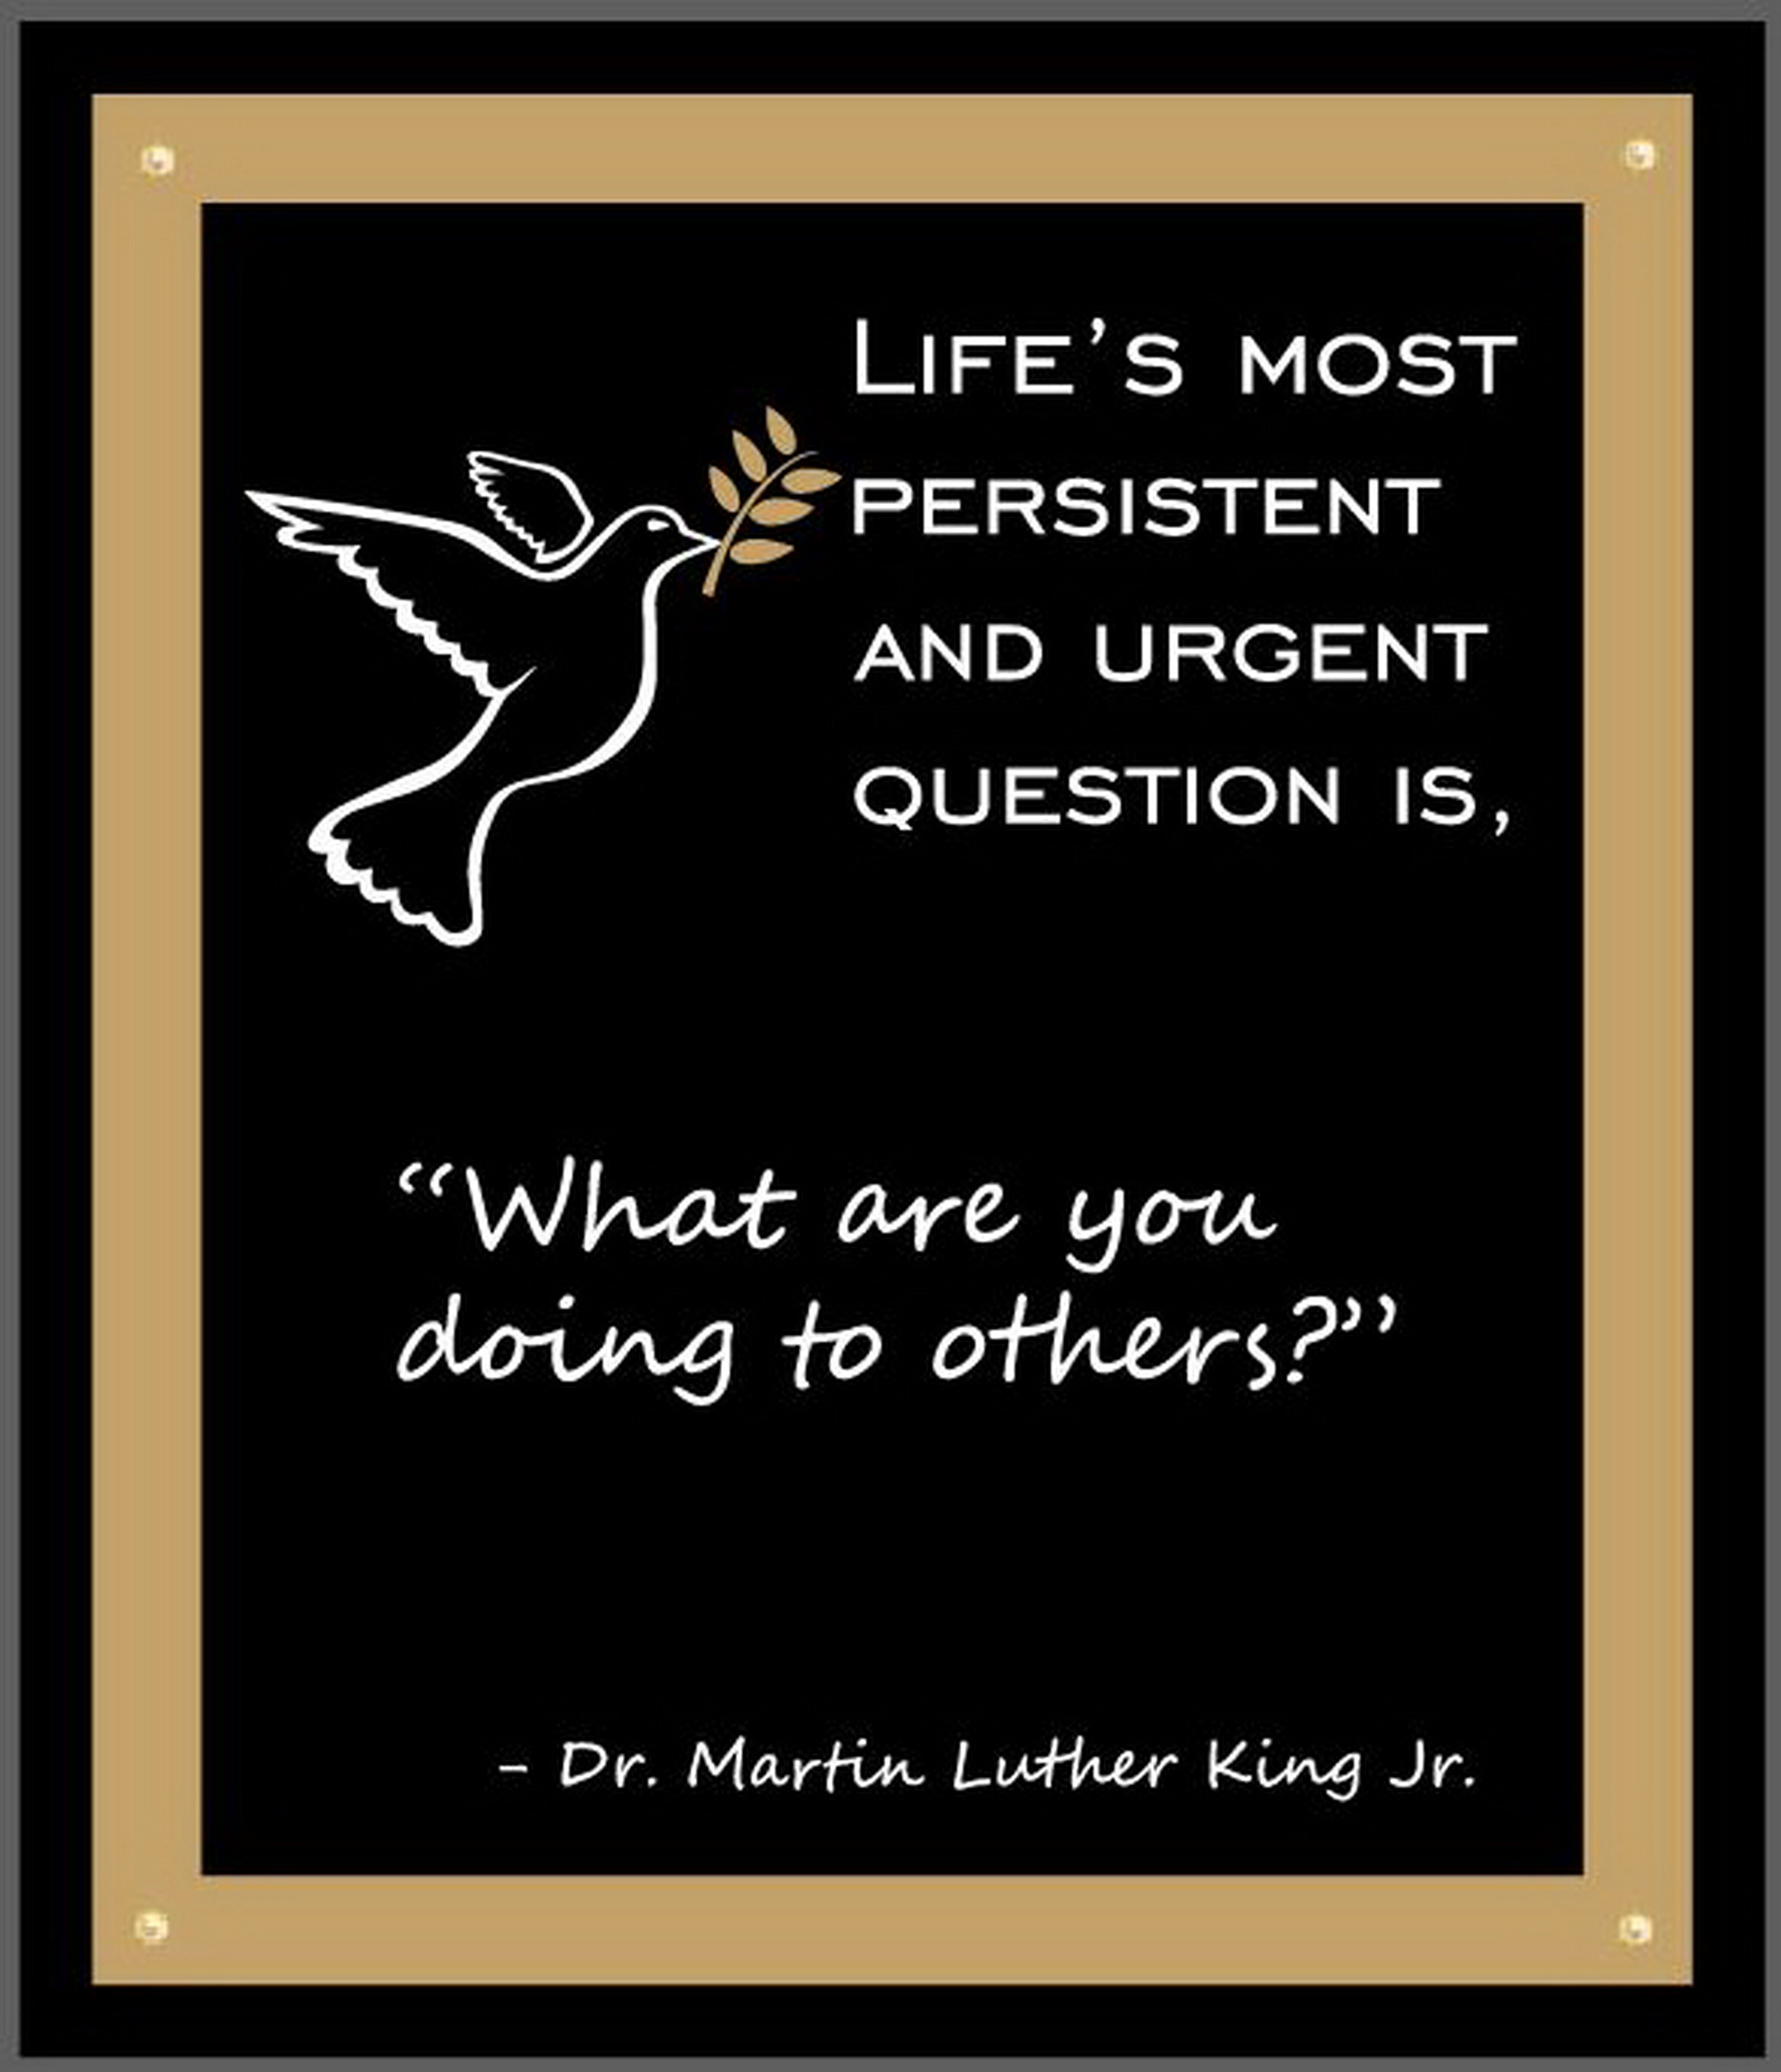 what are you doing for others mlk